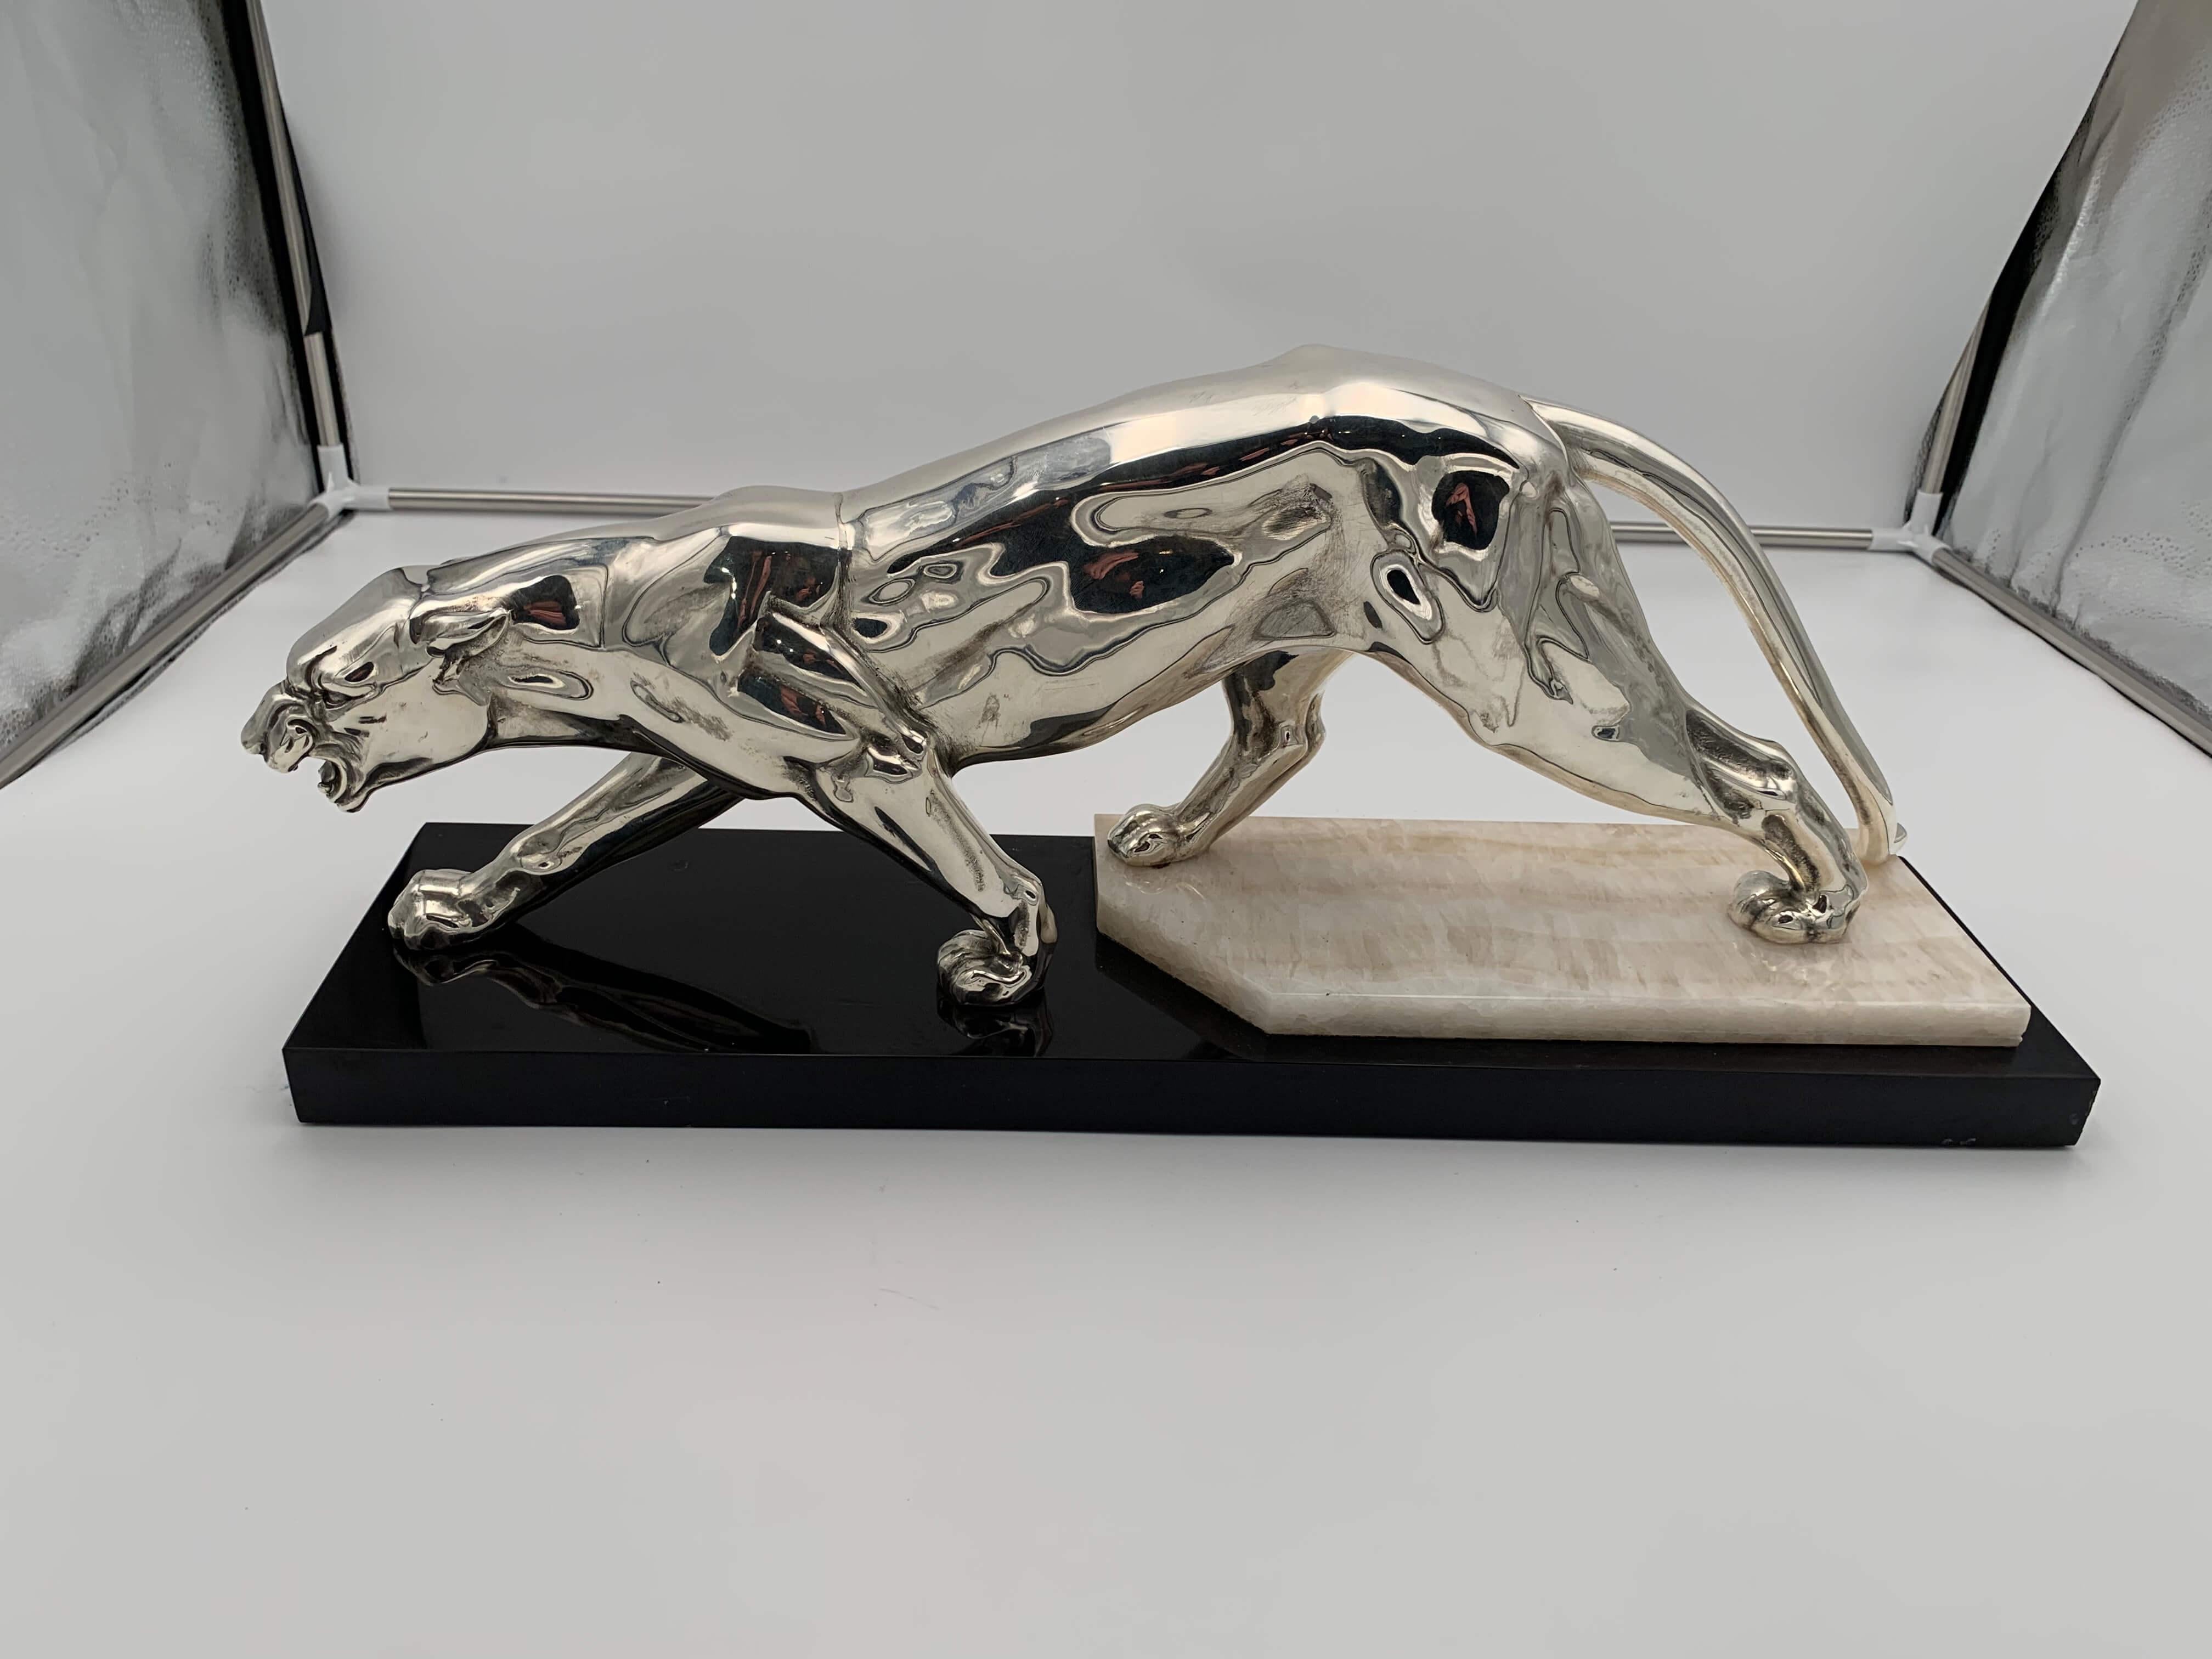 Walking Panther sculpture, silver-plate, marble, France circa 1930

Original Art Deco sculpture of a walking panther in the style of Rochard.

Art metal casting, silver-plated. Standing on marble plinth.
Design: probably Rochard (Irénée